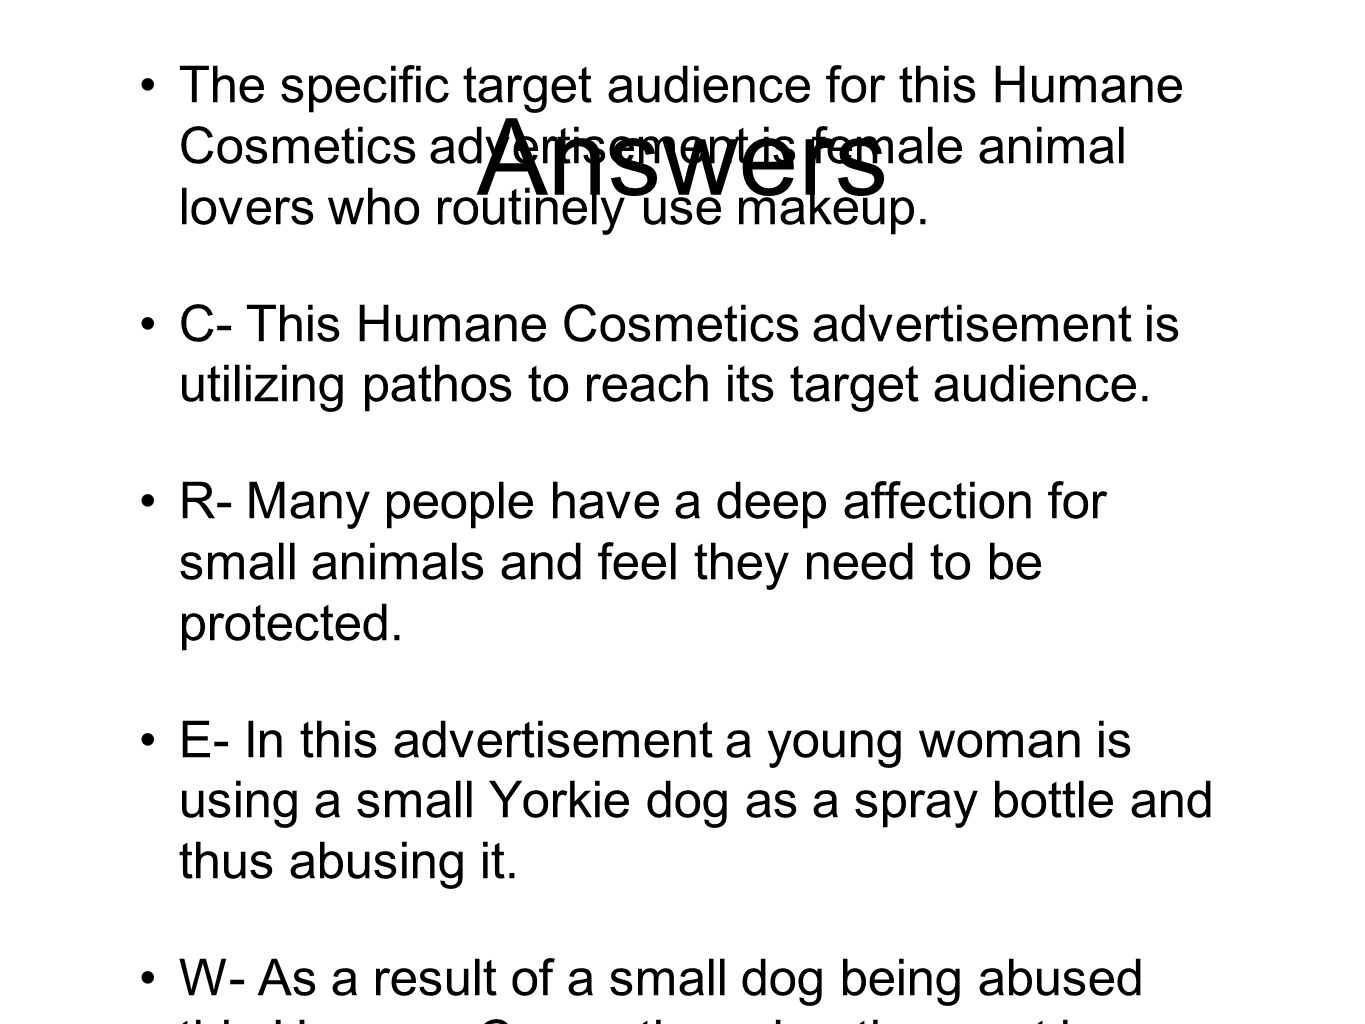 Answers The specific target audience for this Humane Cosmetics advertisement is female animal lovers who routinely use makeup.